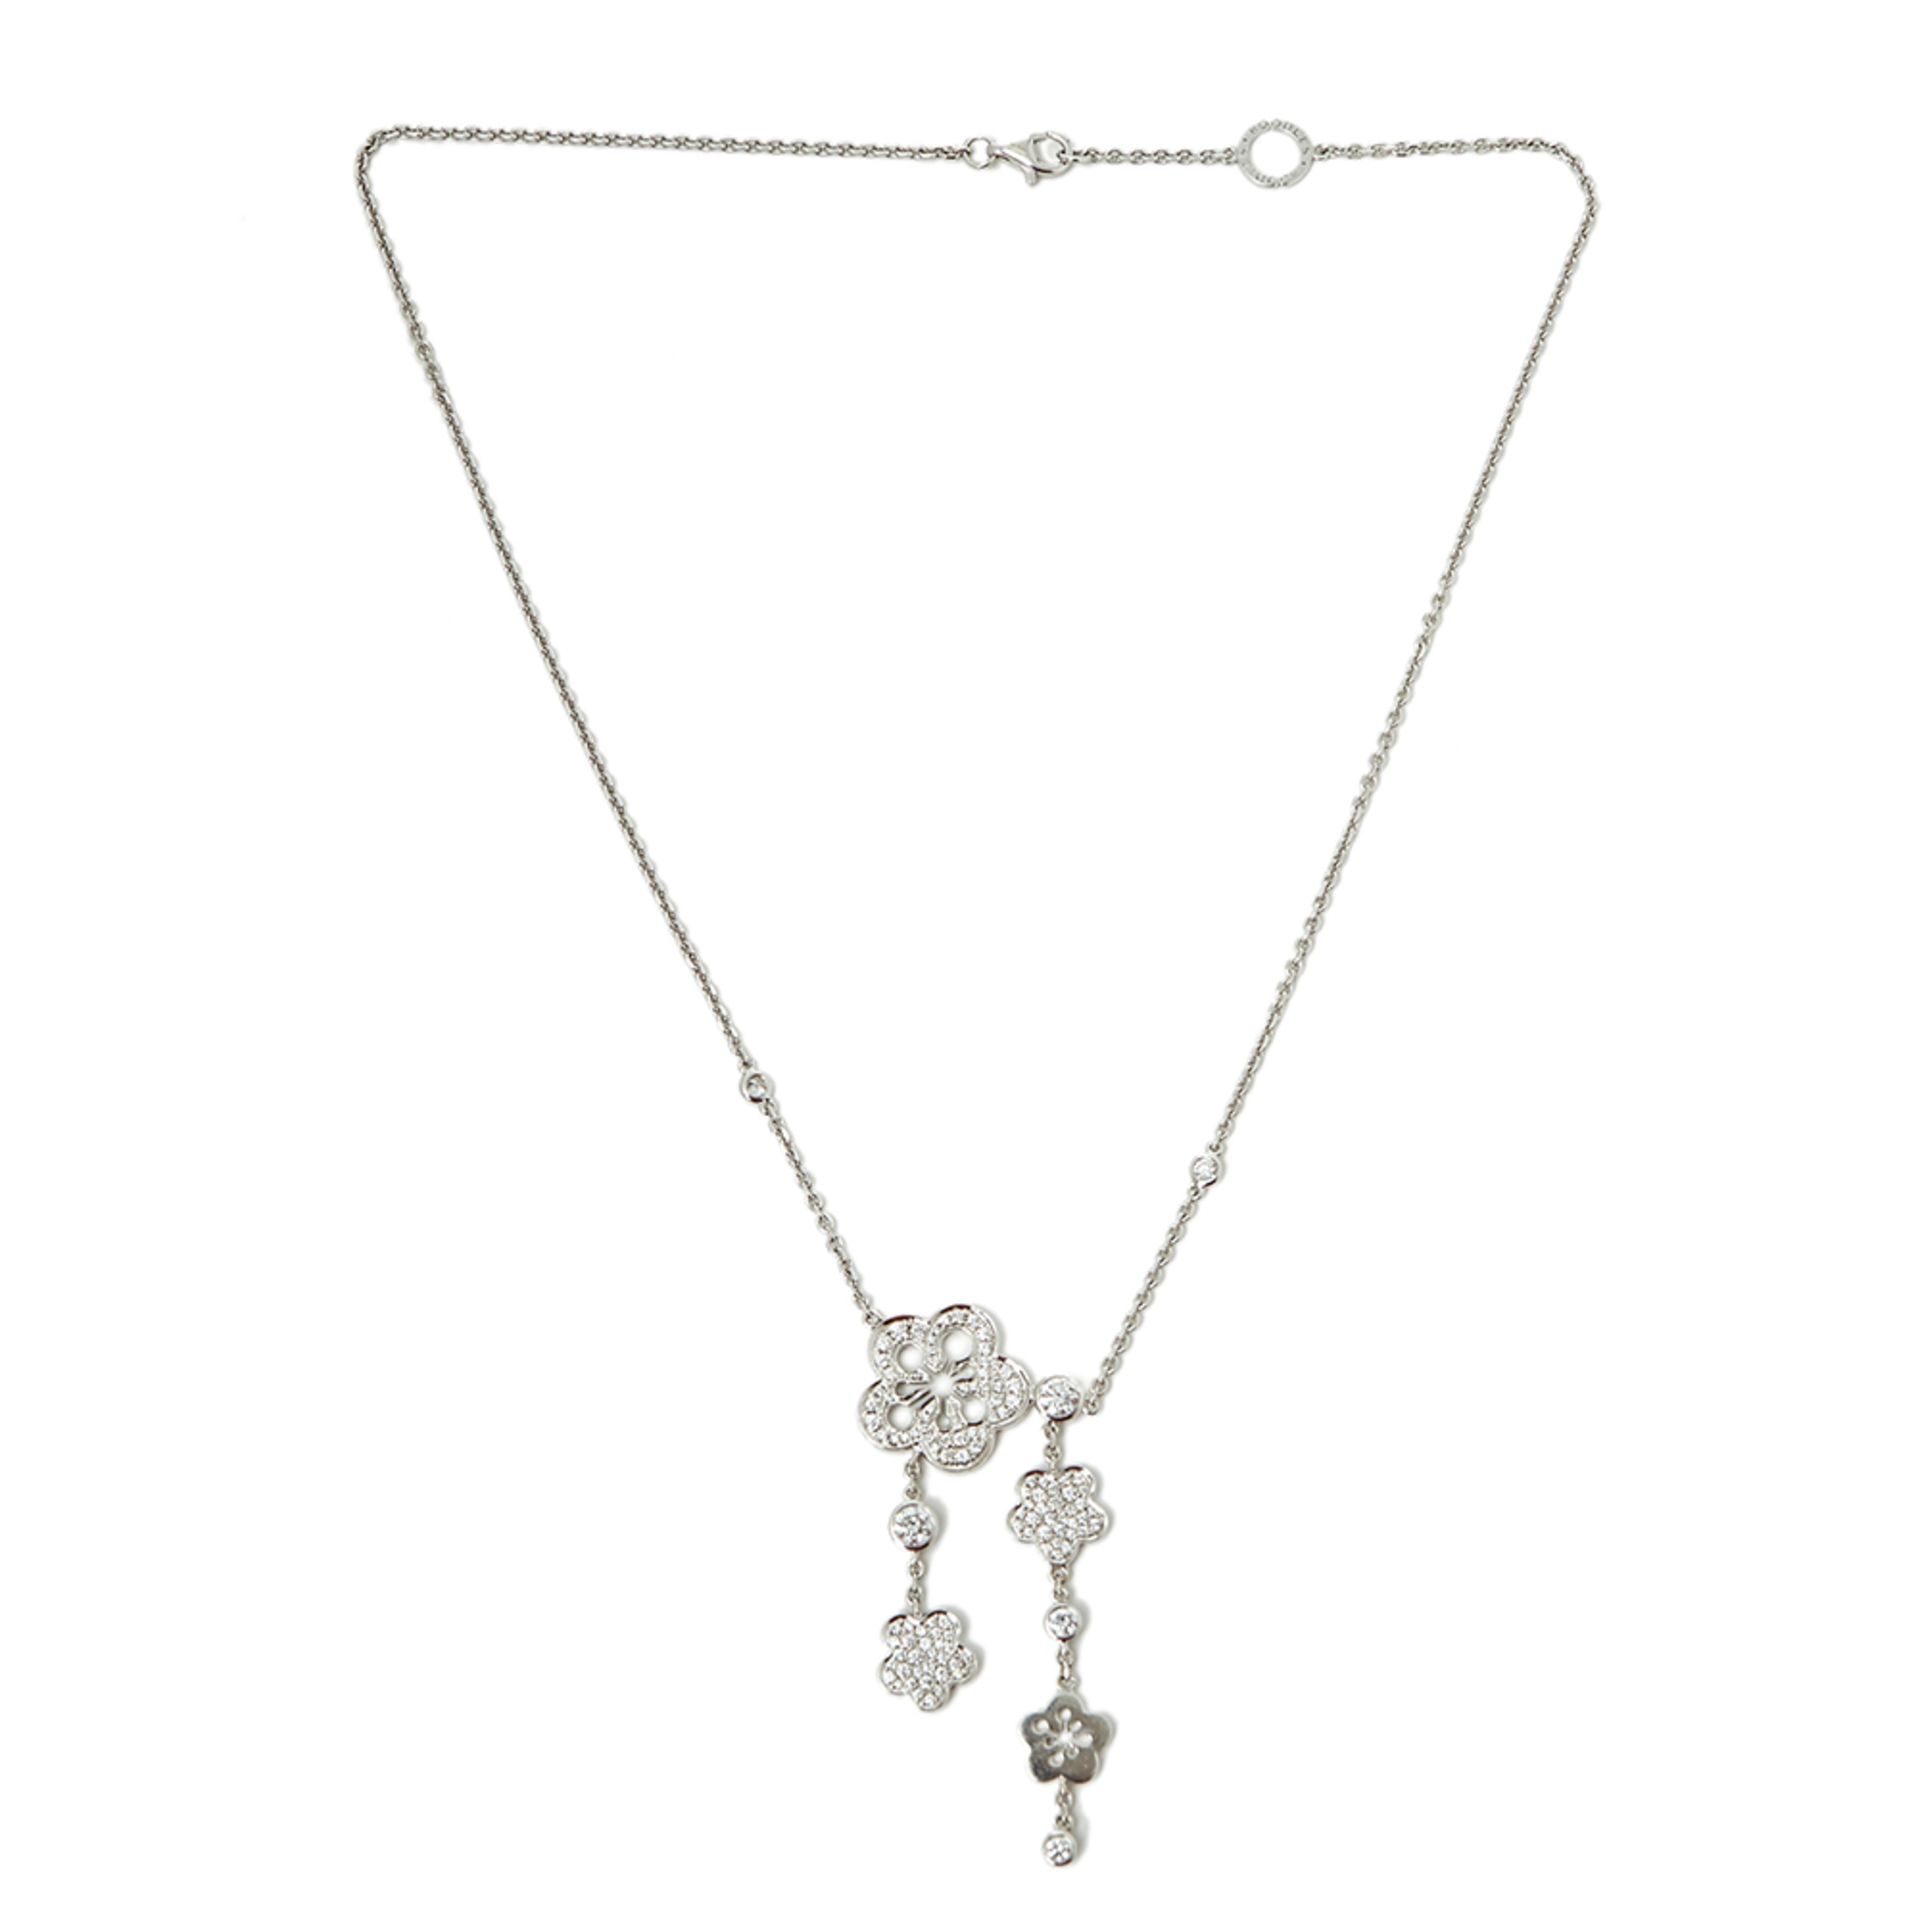 Boodles 18k White Gold Diamond Blossom Necklace - Image 8 of 9